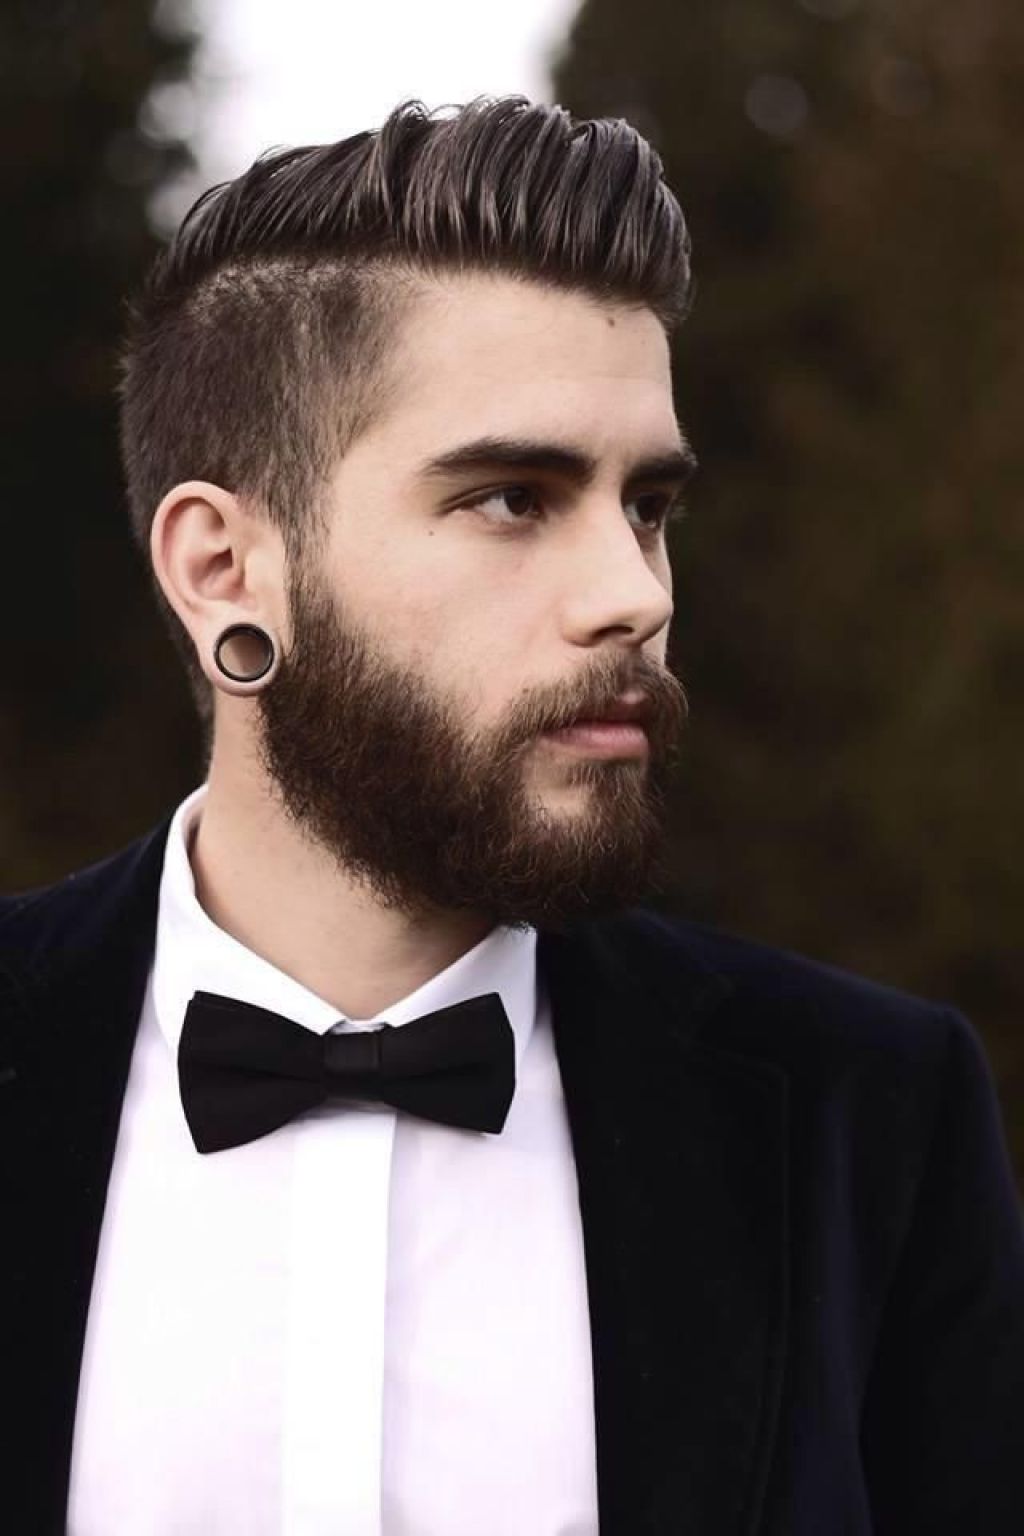  hipster hairstyles for men casual